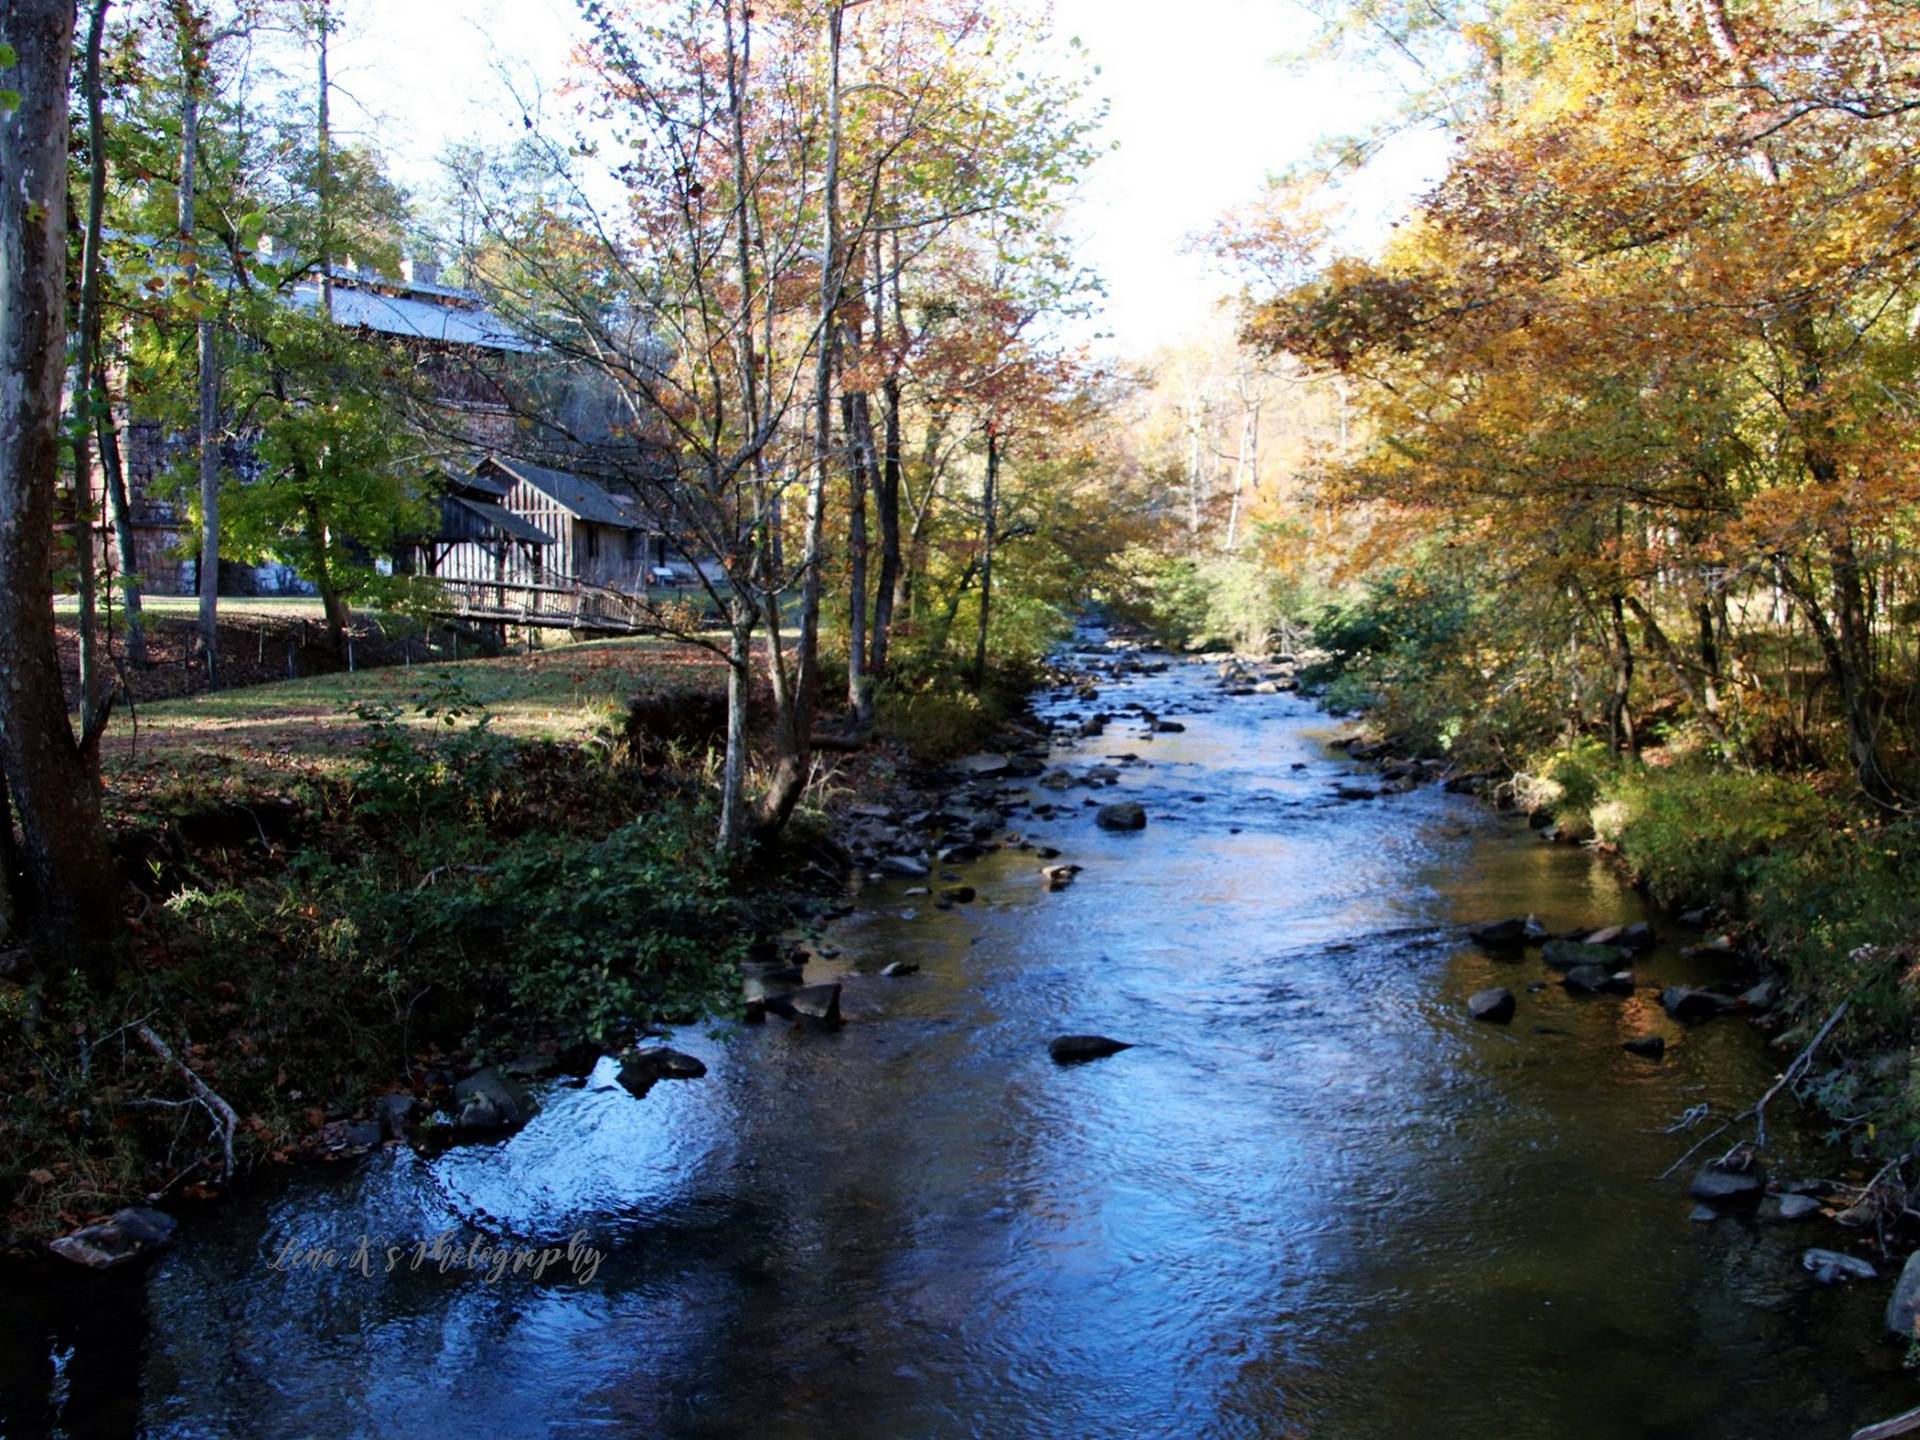 Creek and Grist Mill in Tannehill Ironworks State Park